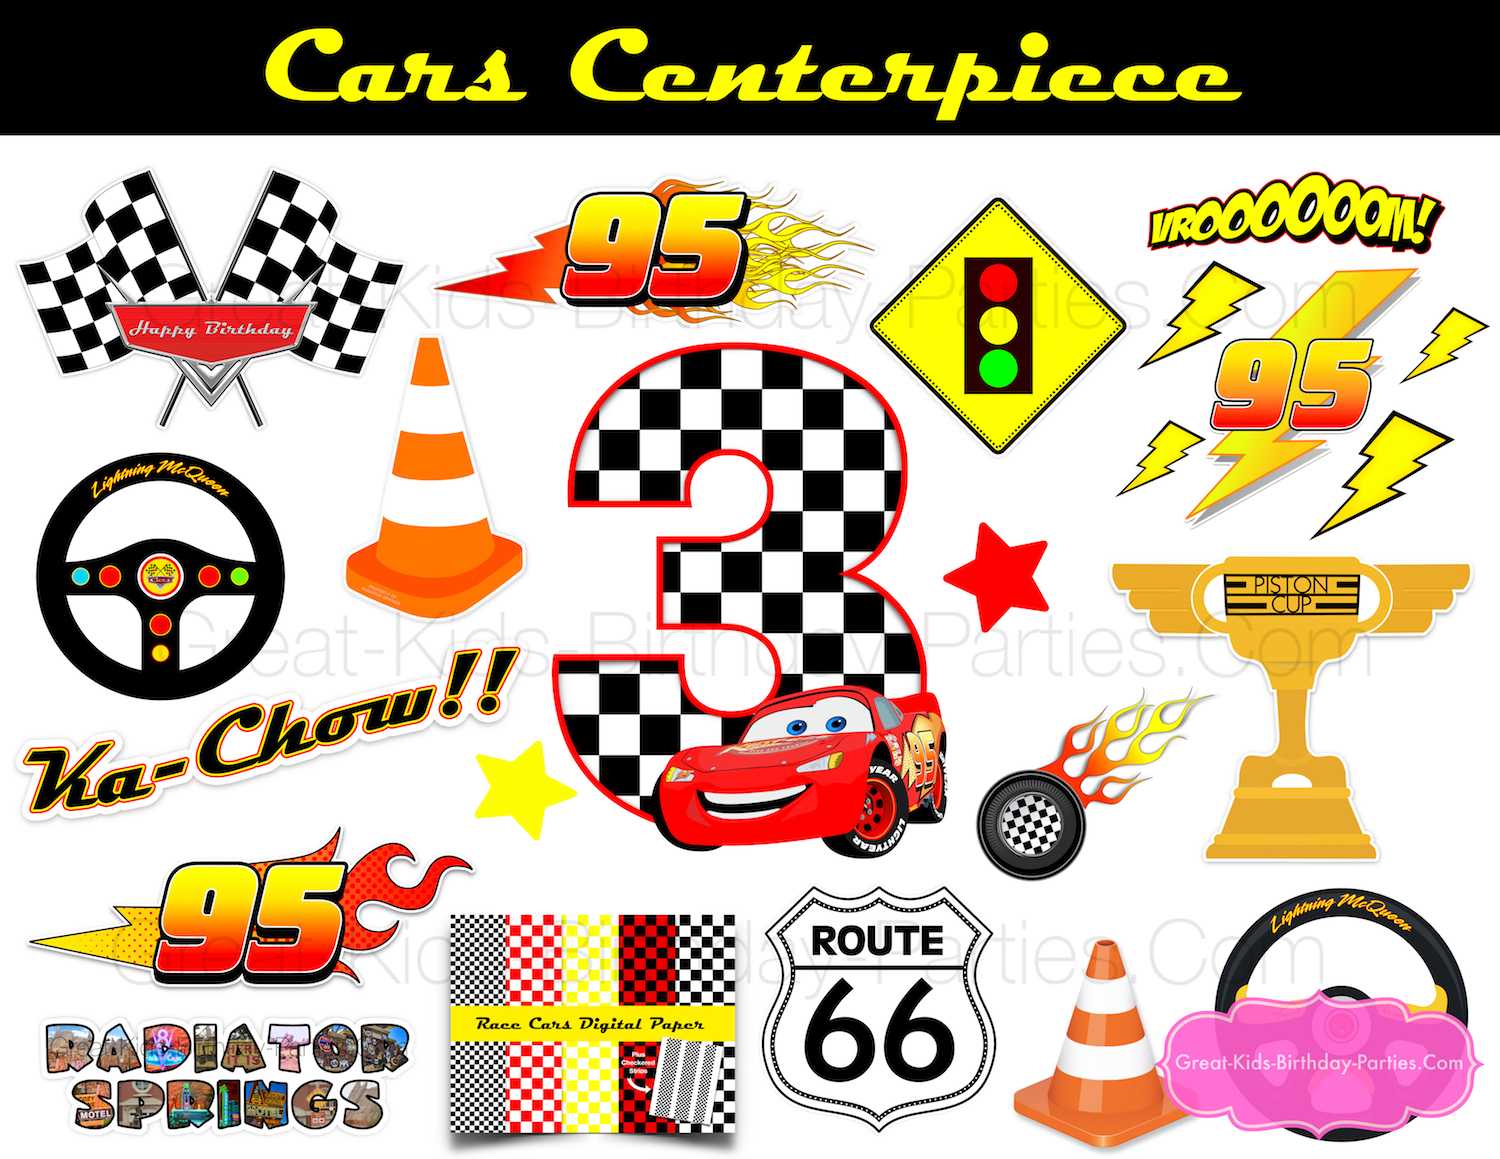 Disney Cars Birthday Party With Cars Birthday Banner Template